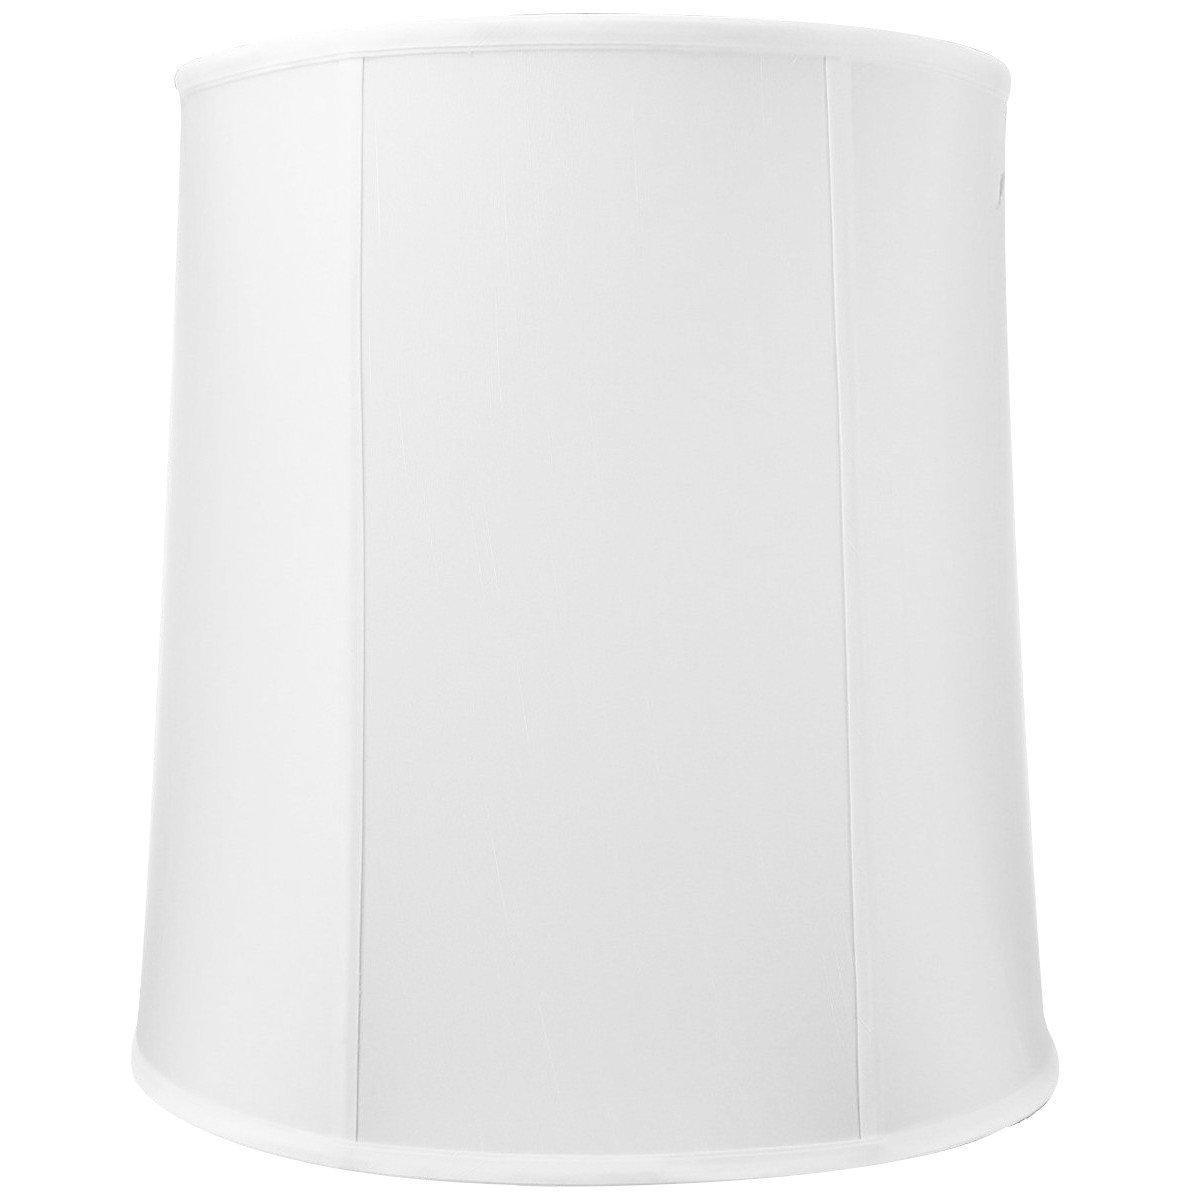 14"x16"x17" Large Drum Lampshade White Shantung, Large Cylinder - Specialty Shades